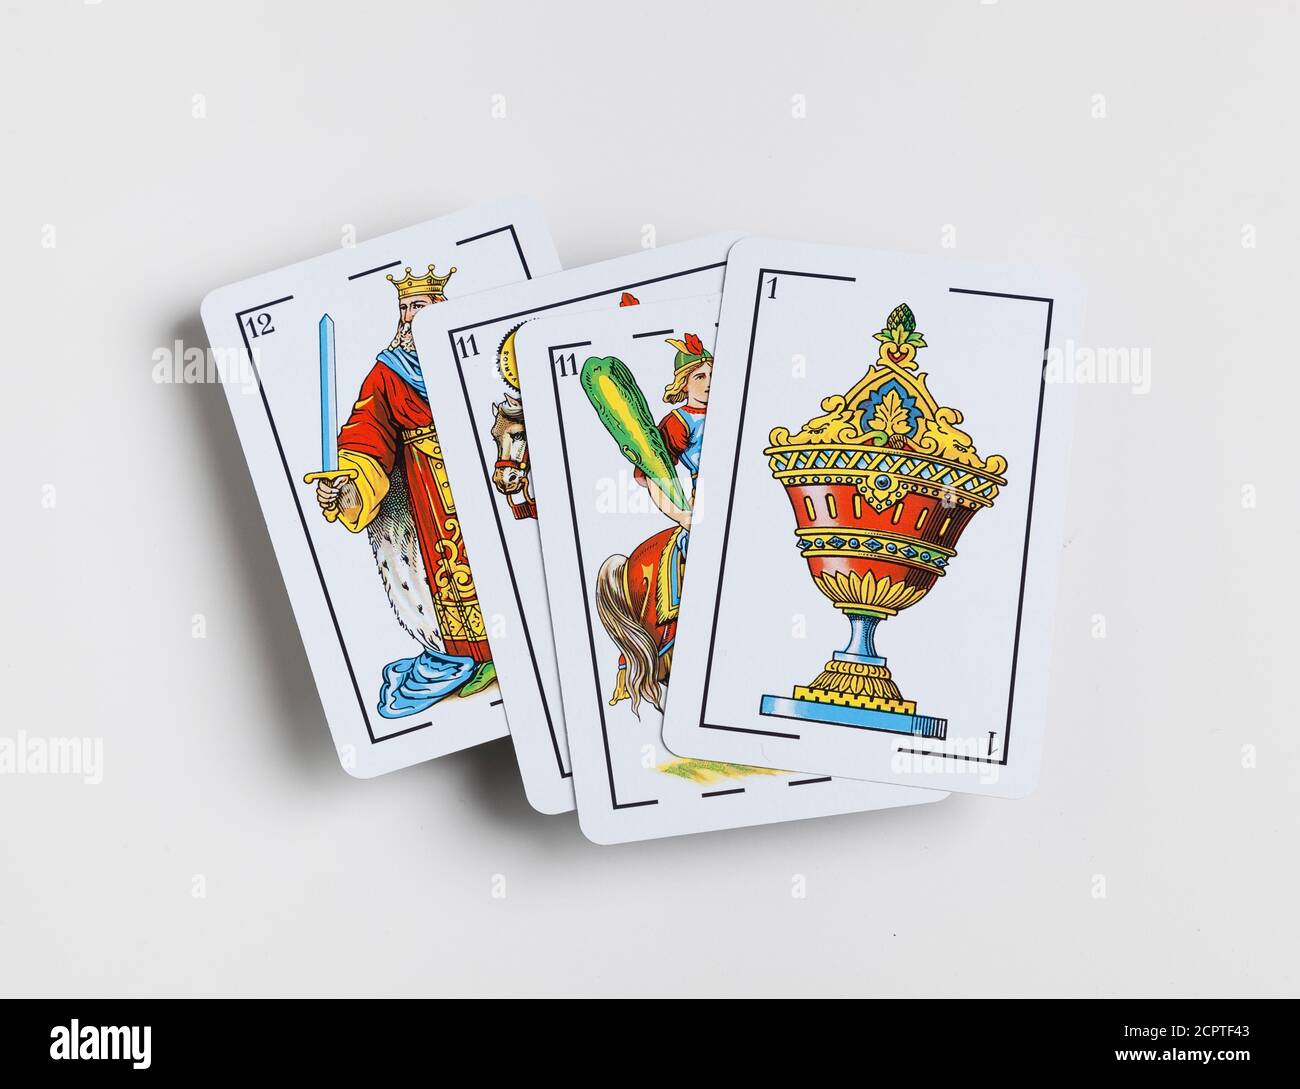 Spanish playing cards called naipes. Stock Photo